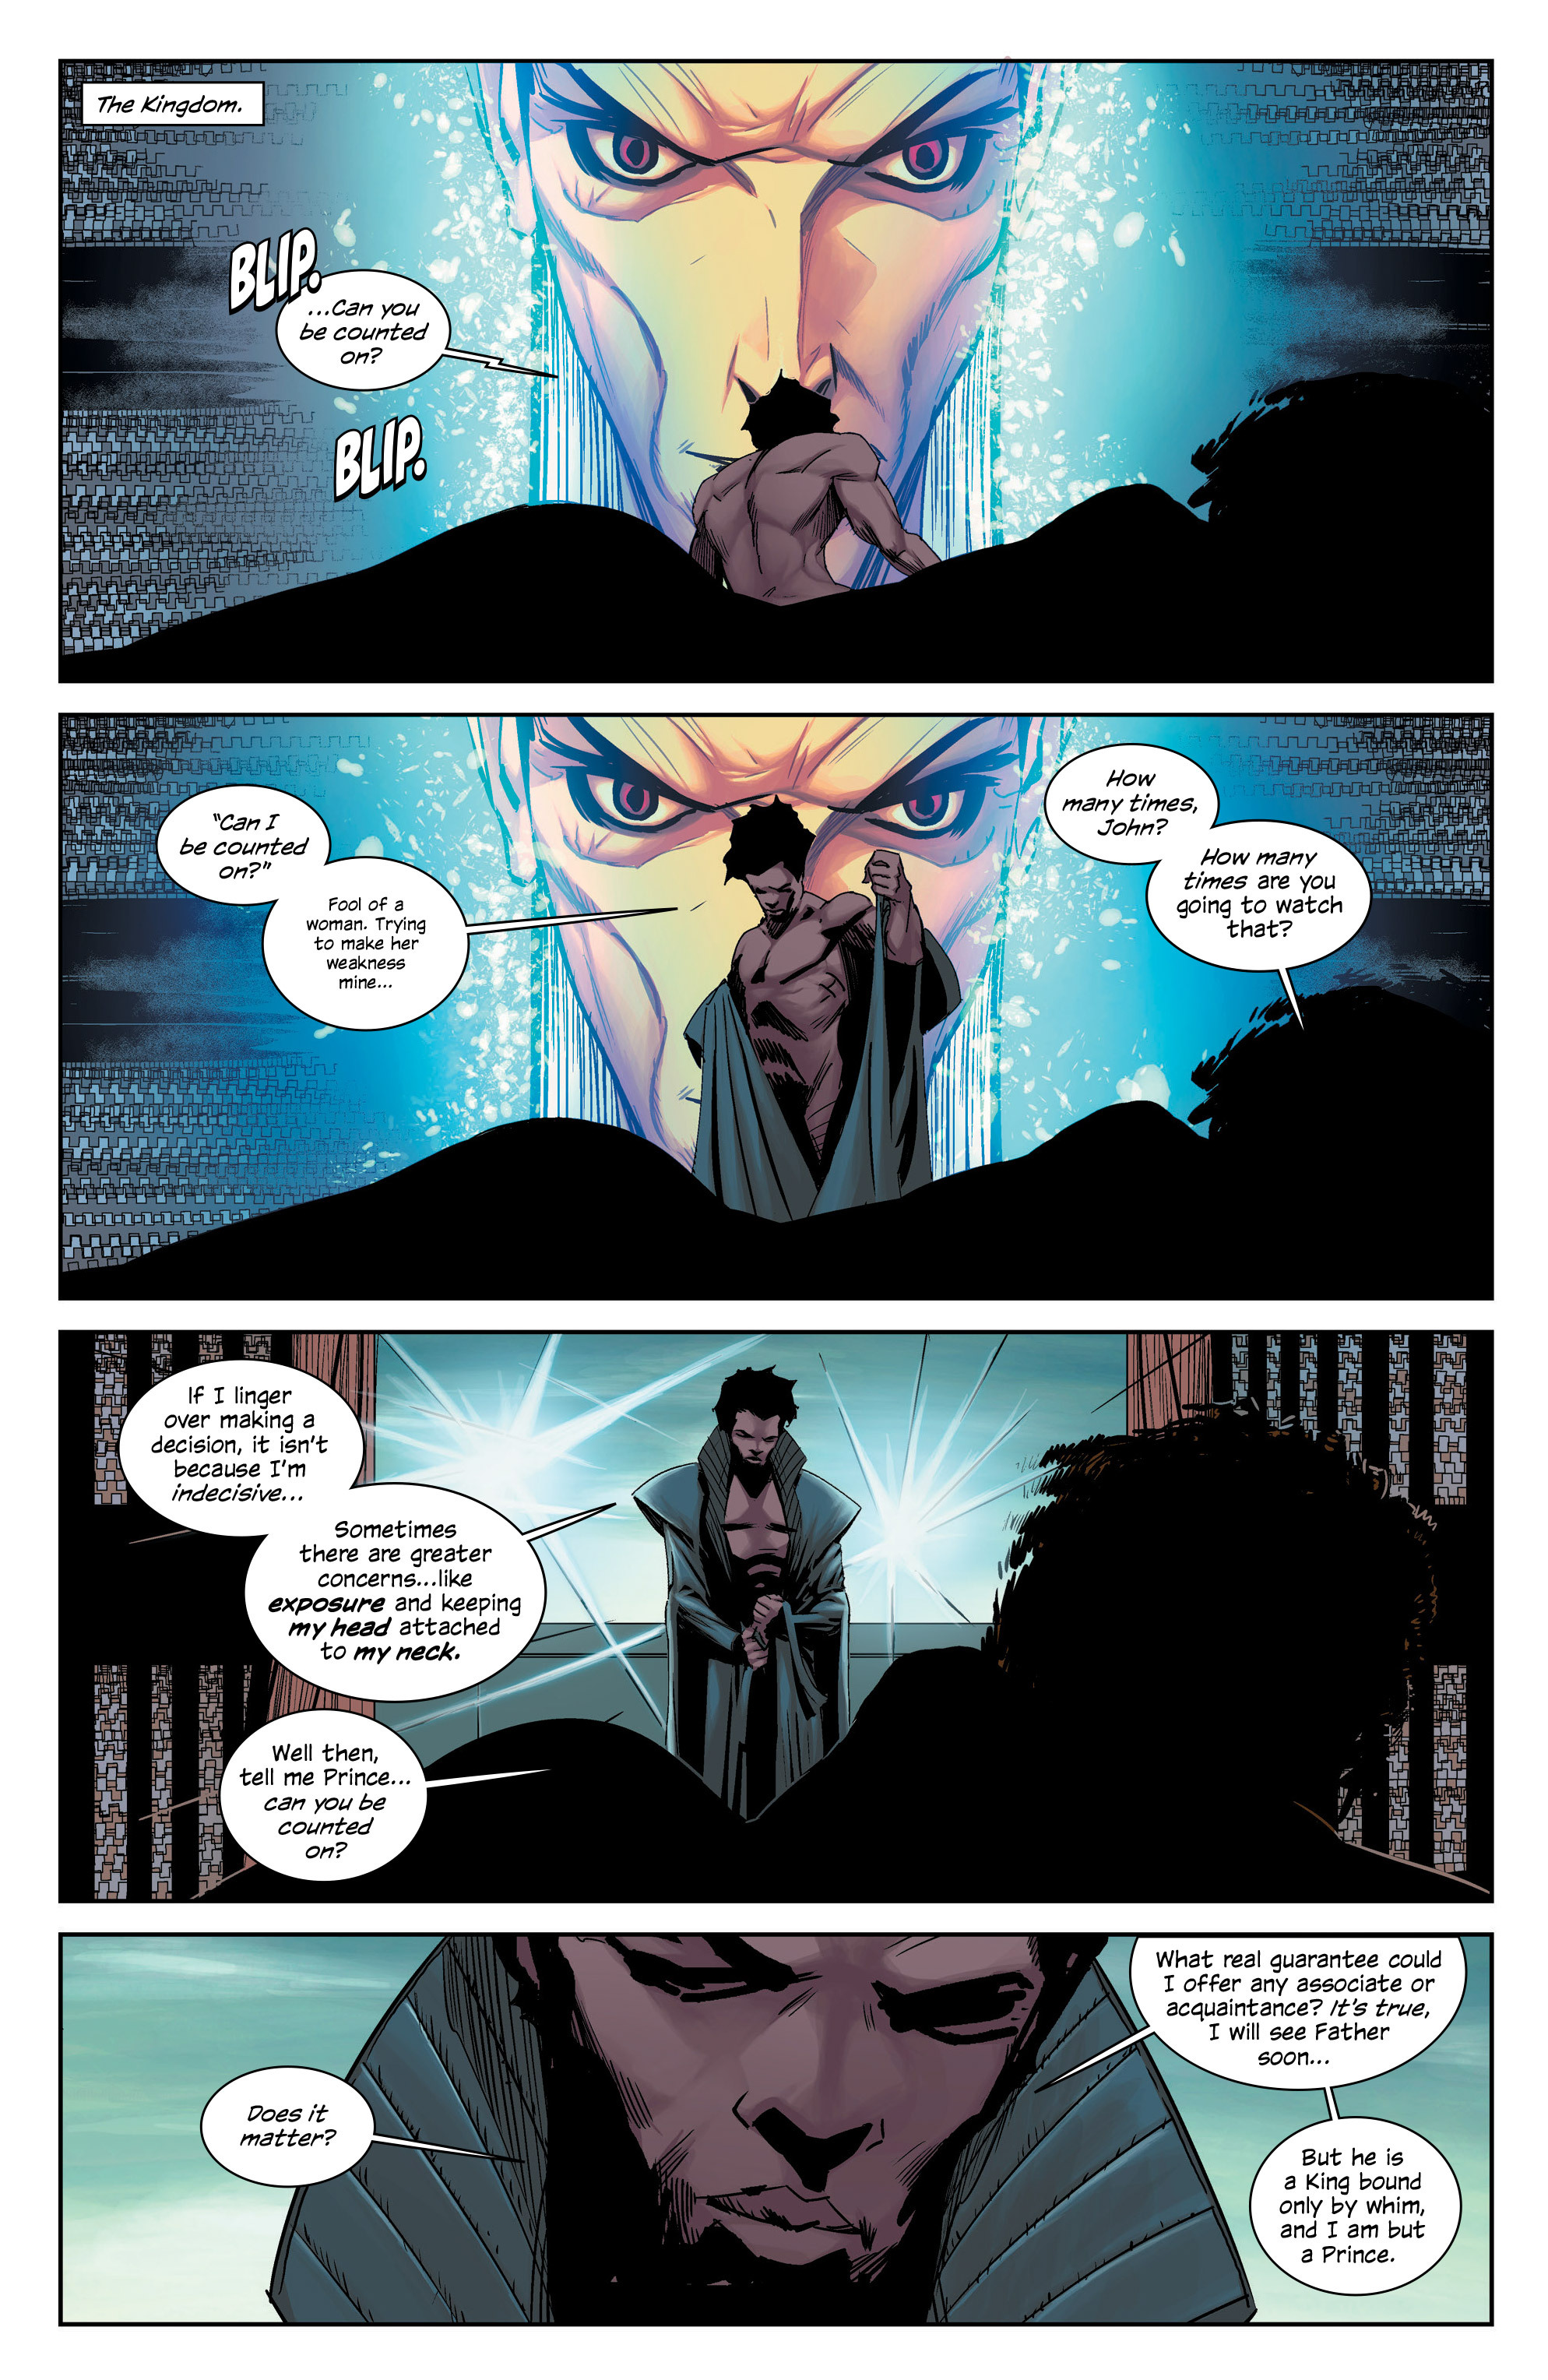 East of West (2013-): Chapter 9 - Page 3